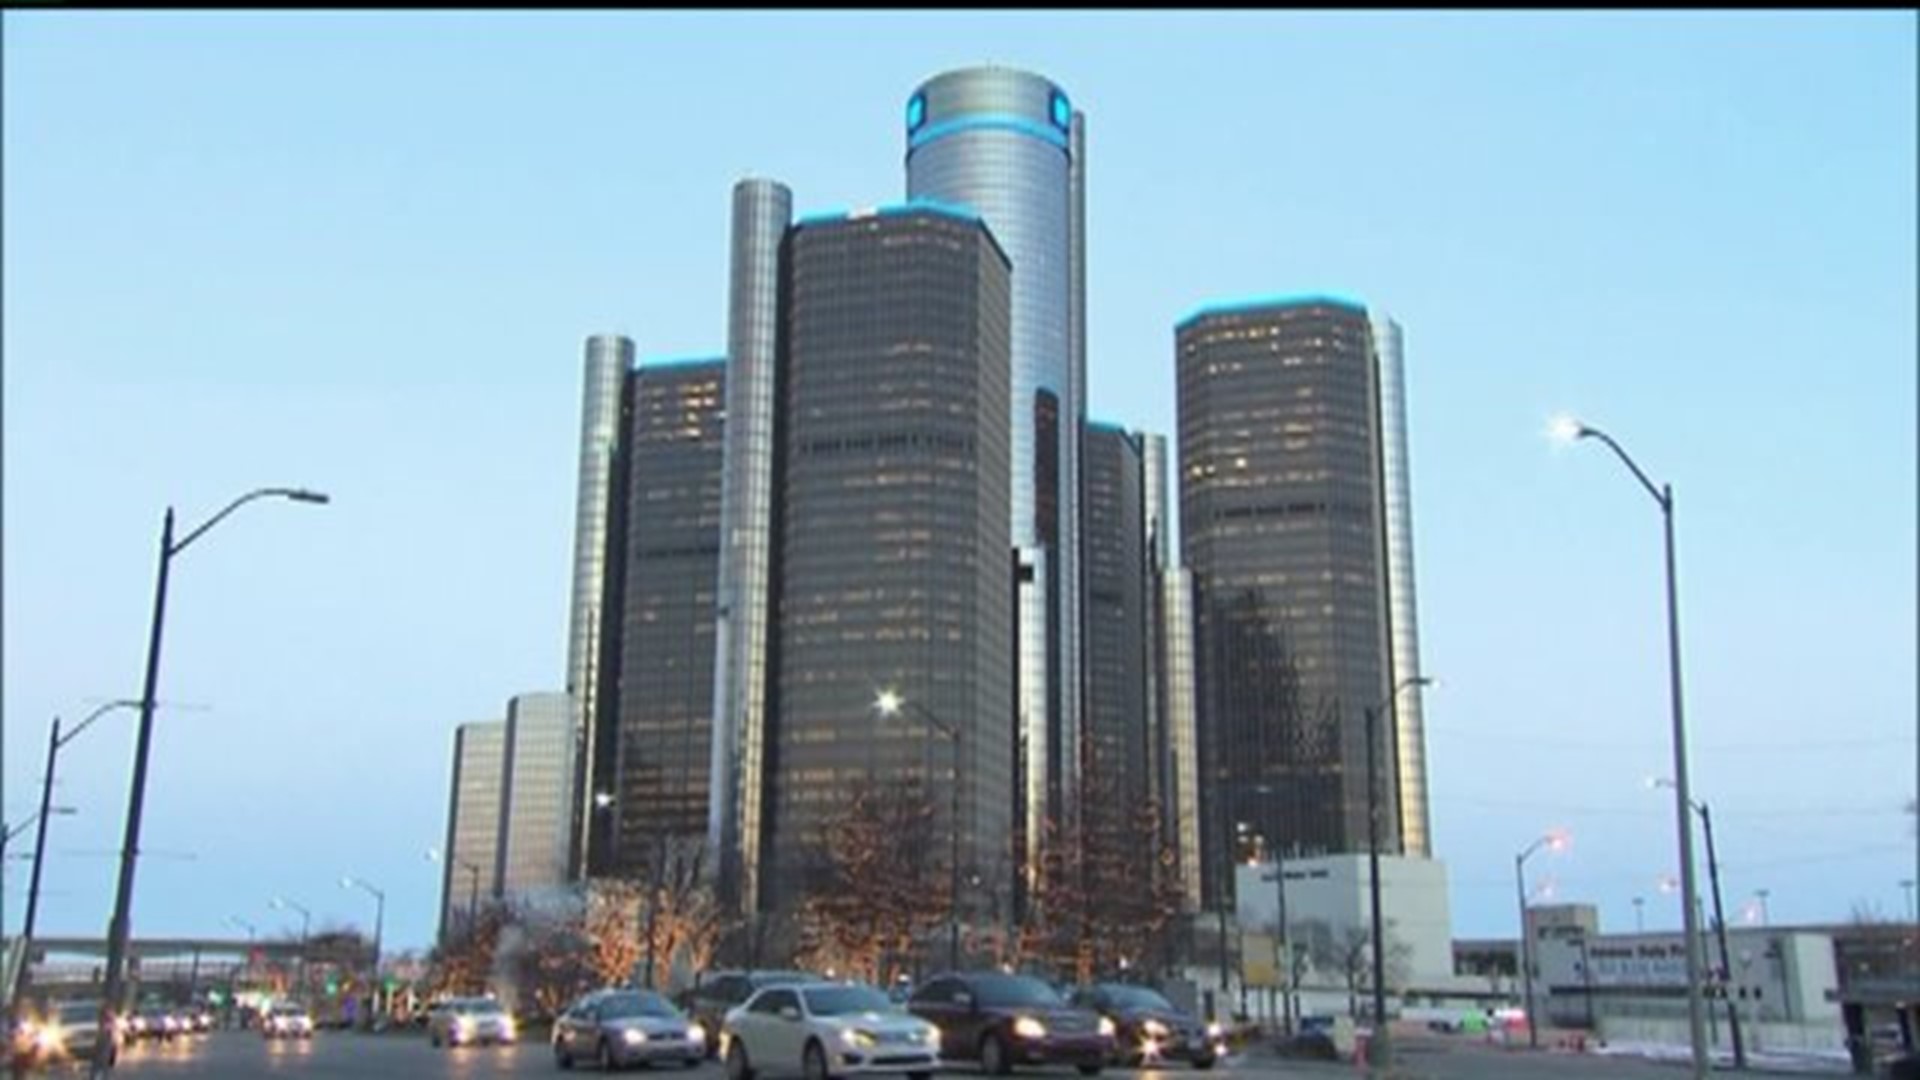 General Motors to pay $35 million over delayed recall